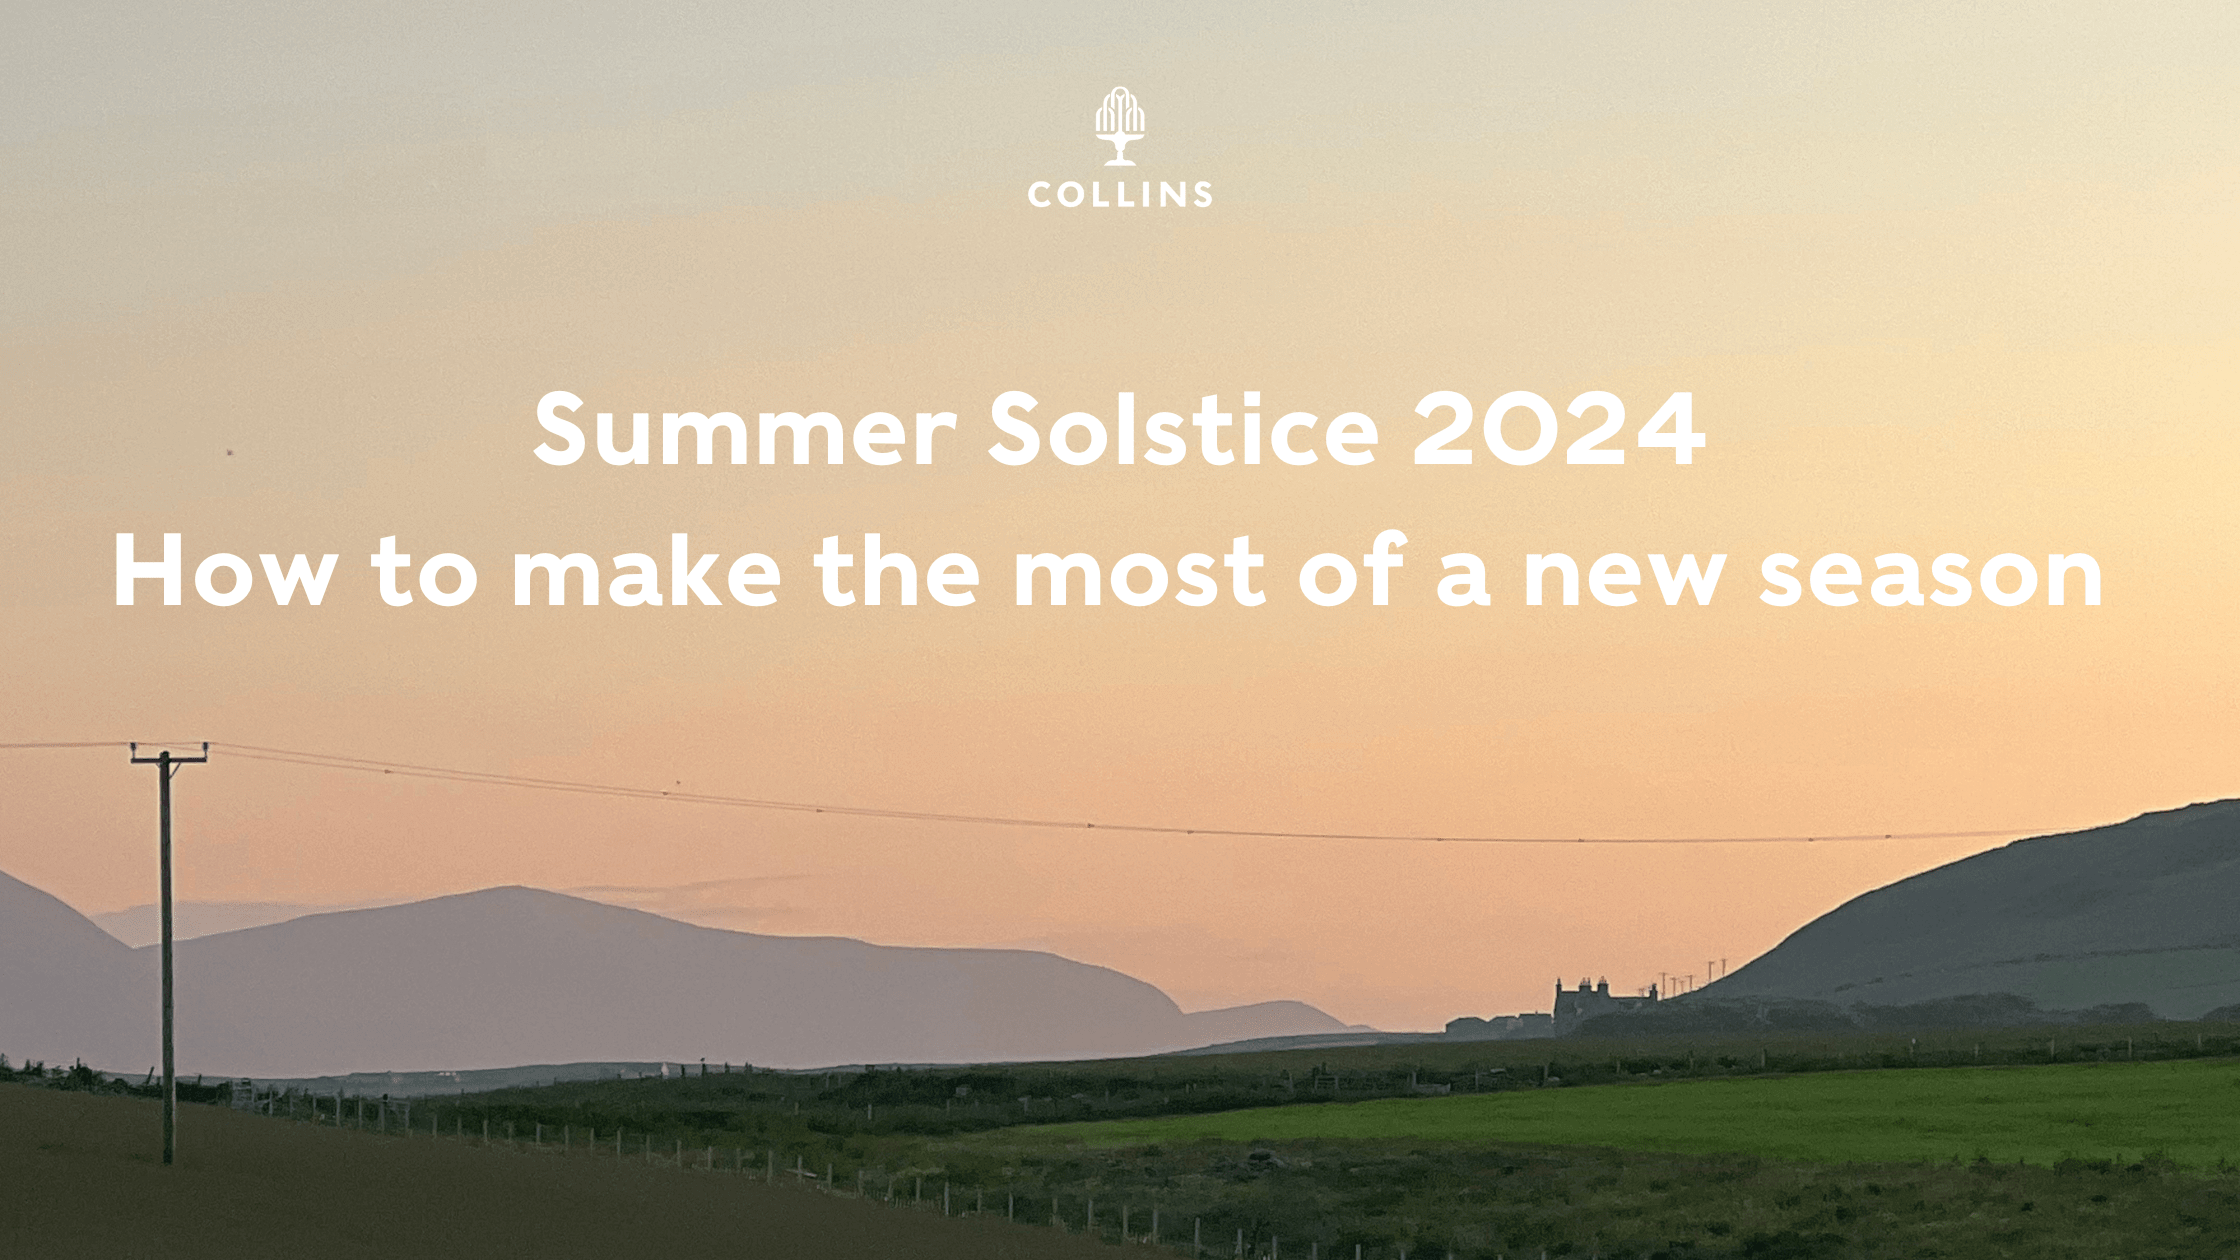 Summer Solstice 2024: How to Make the Most of a New Season